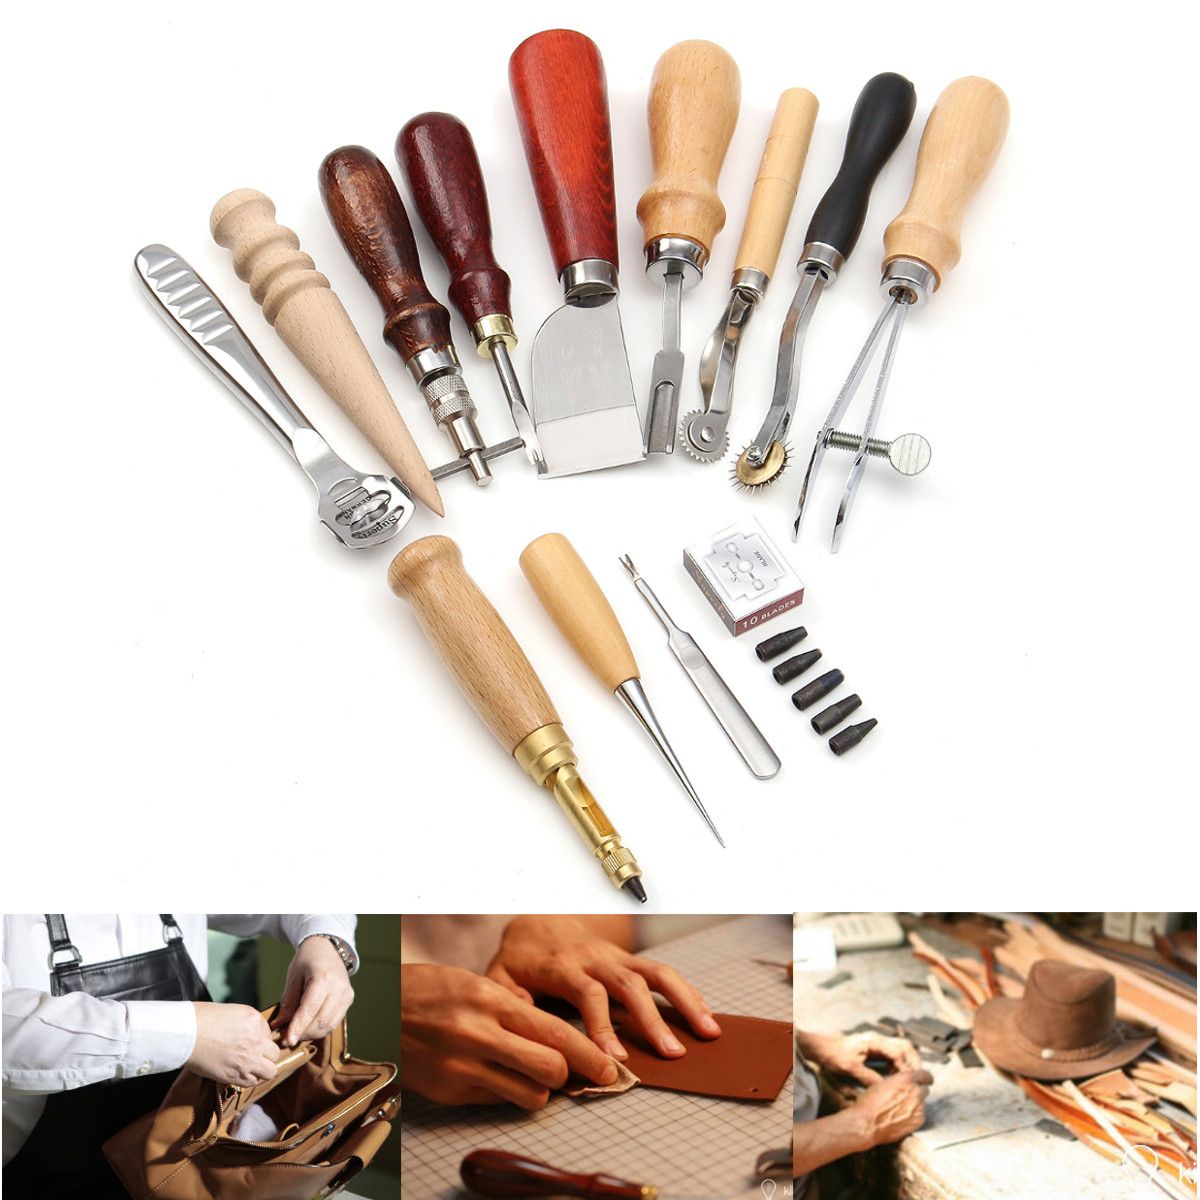 13pcs-Leather-Craft-DIY-Tool-Hand-Stitching-Cutter-Sewing-Awl-Tools-Kit-1112035